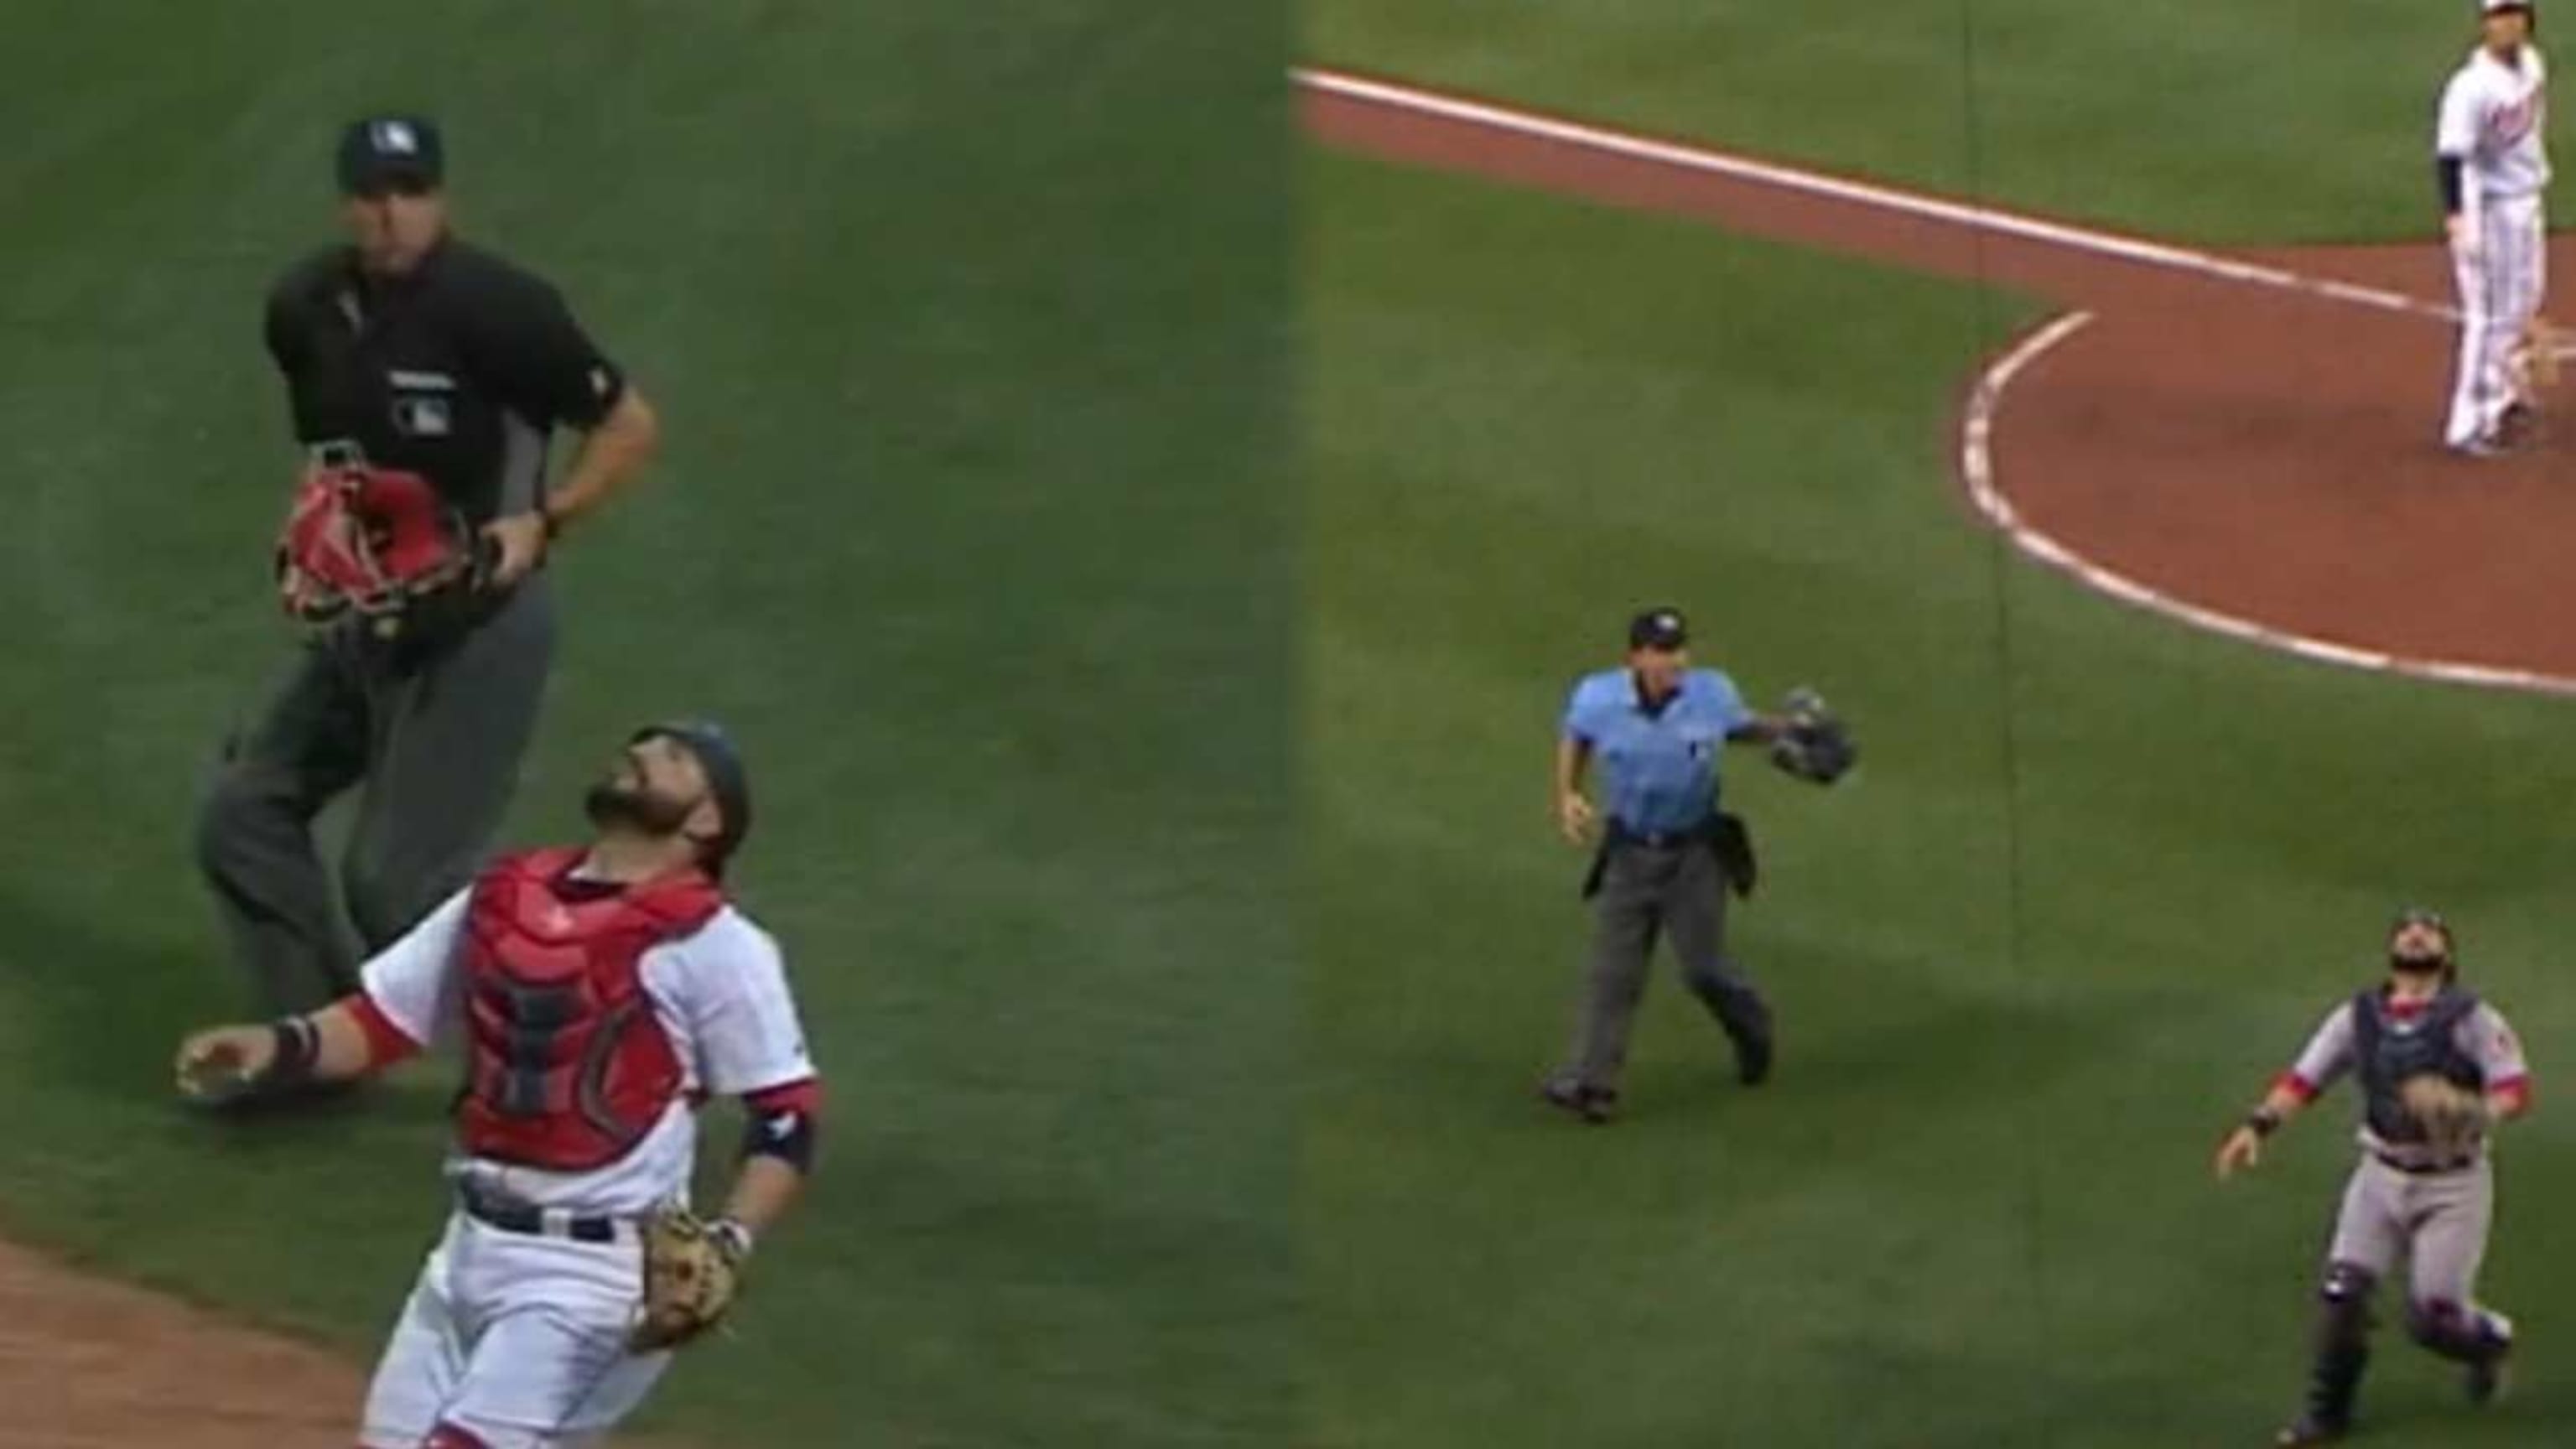 Sandy Leon has mastered the art of nonchalantly tossing his mask to the home -plate umpire